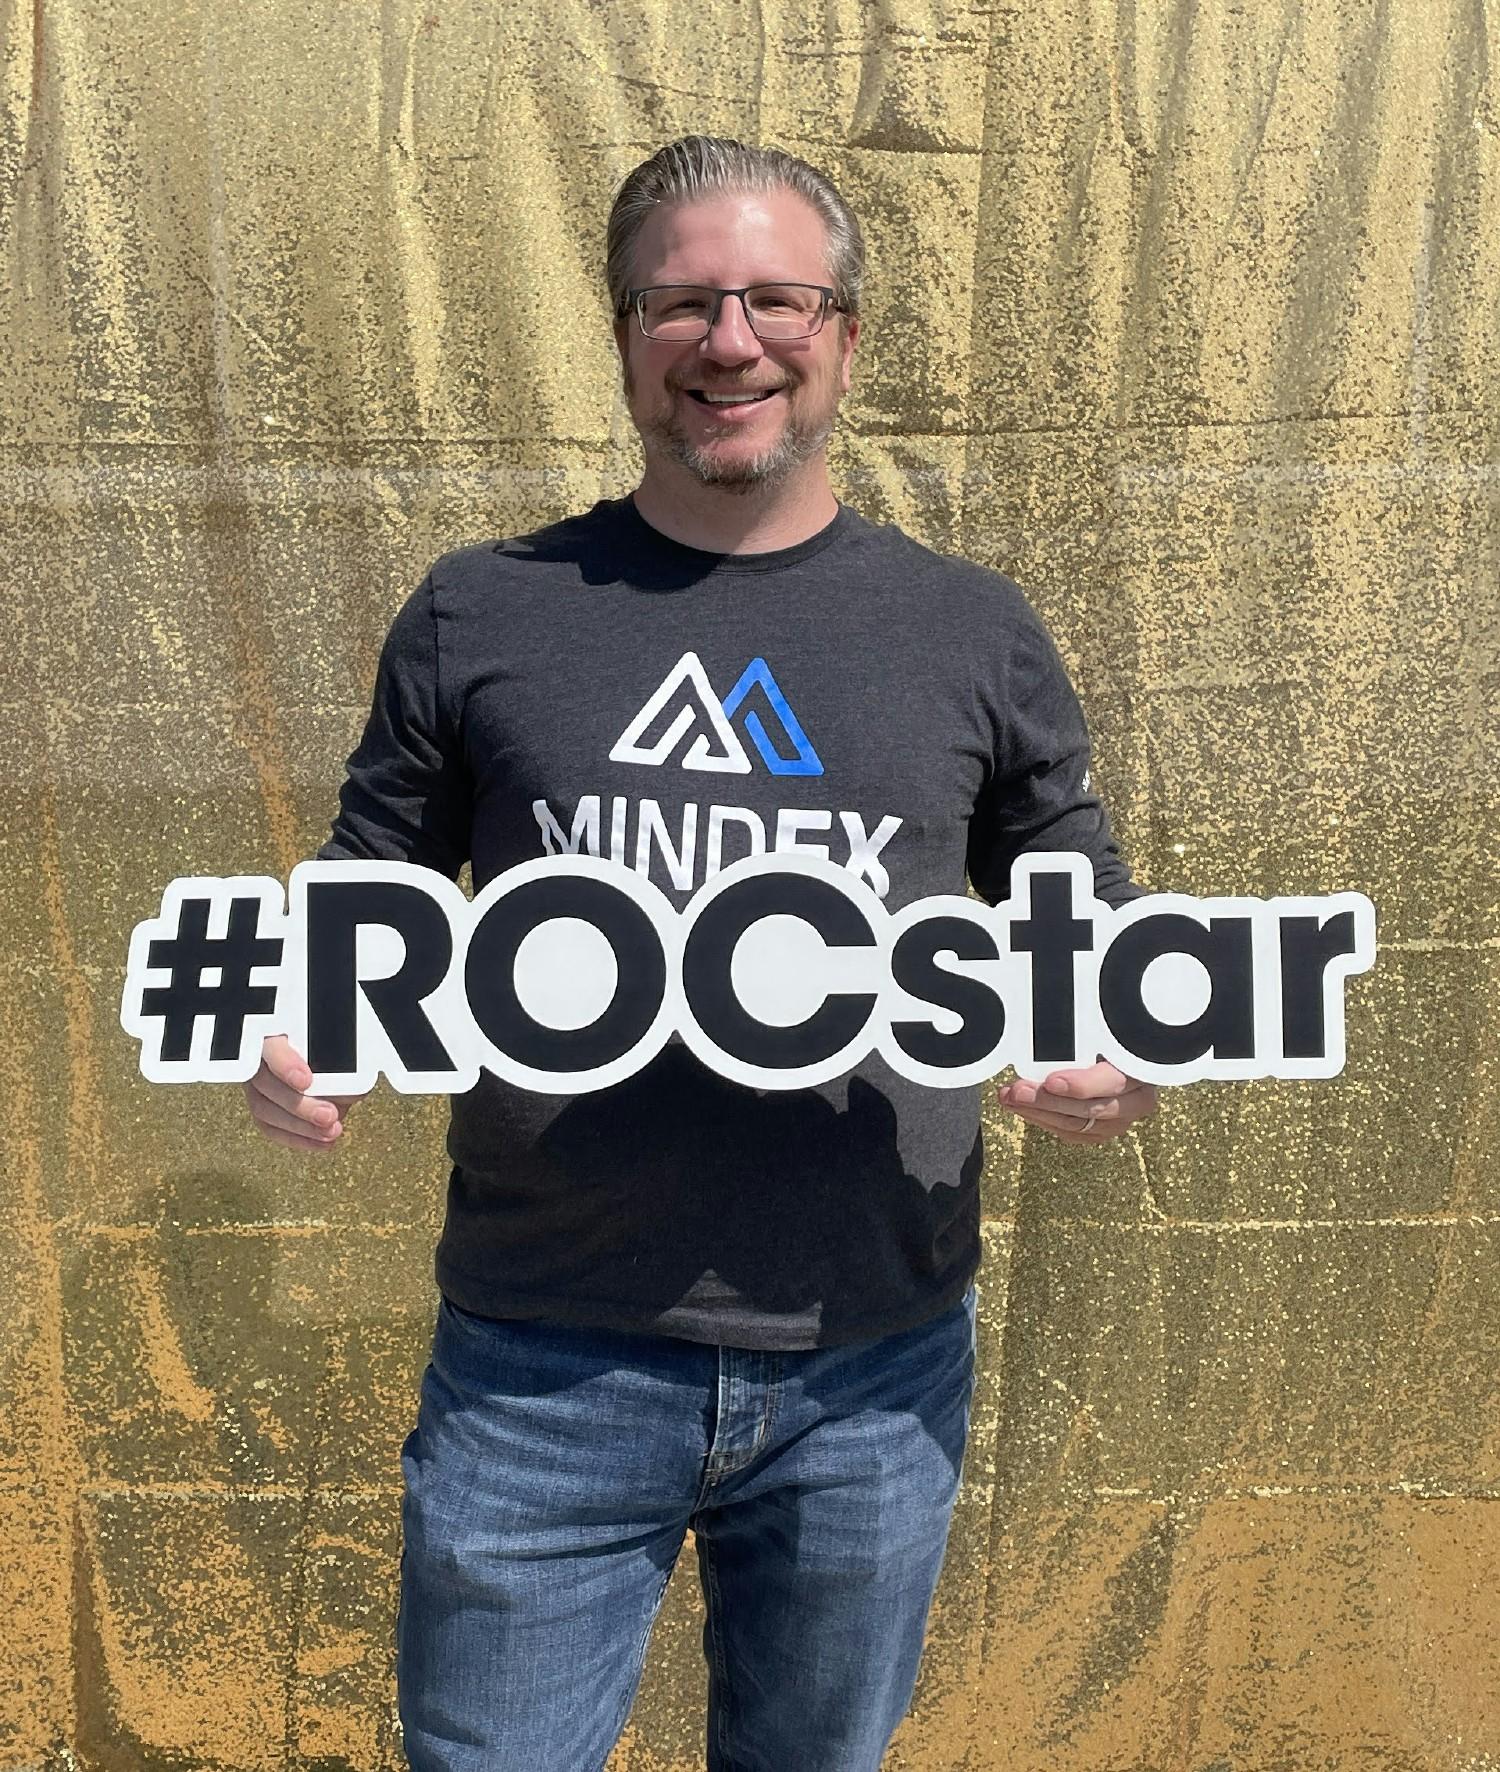 Representing all the Rochester rockstars with our company hashtag #ROCstar